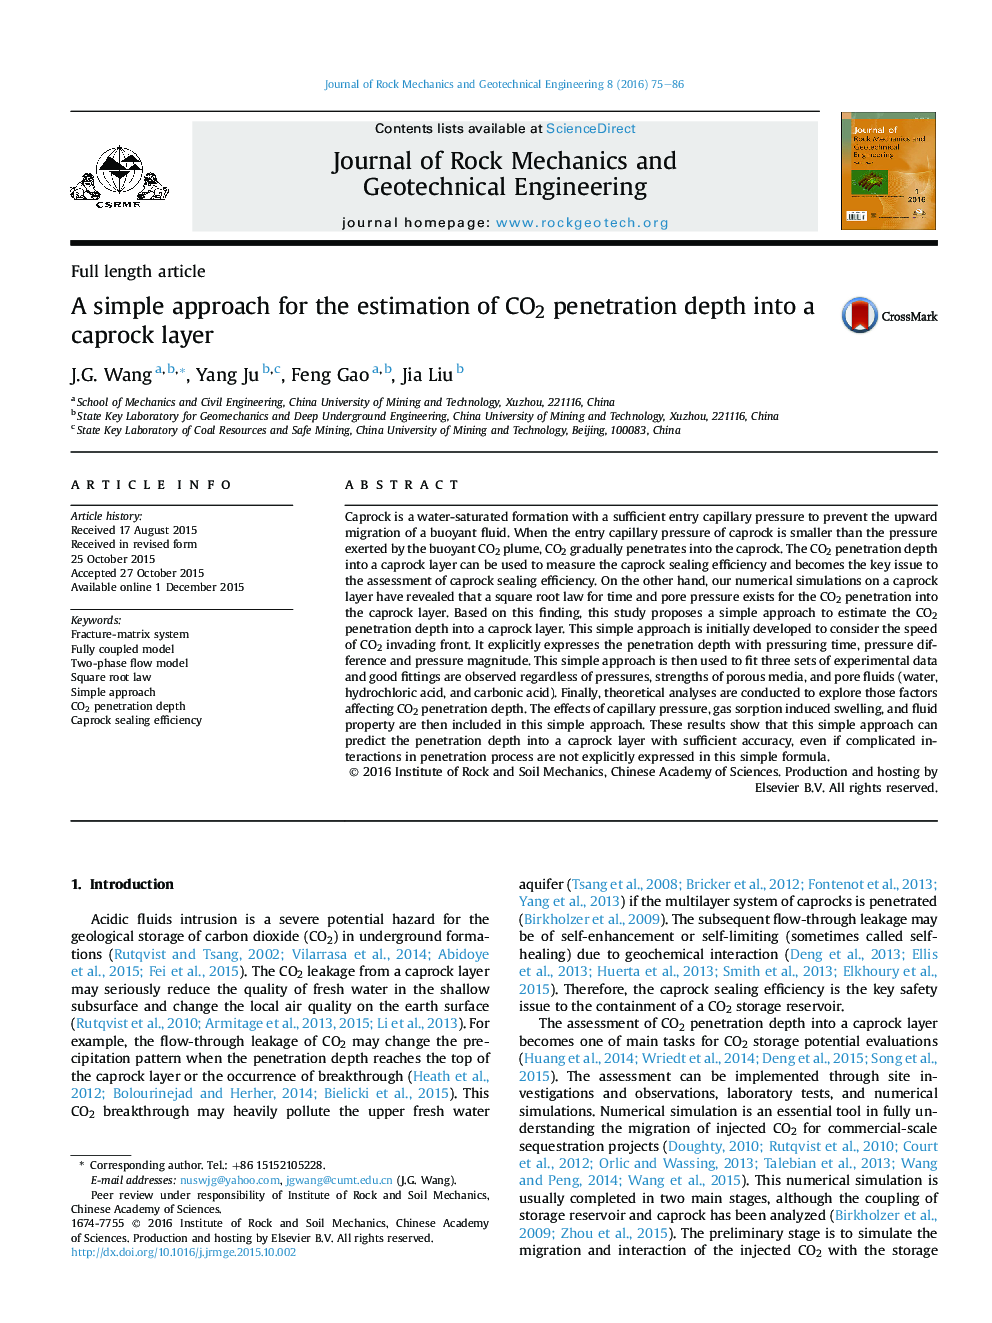 A simple approach for the estimation of CO2 penetration depth into a caprock layer 